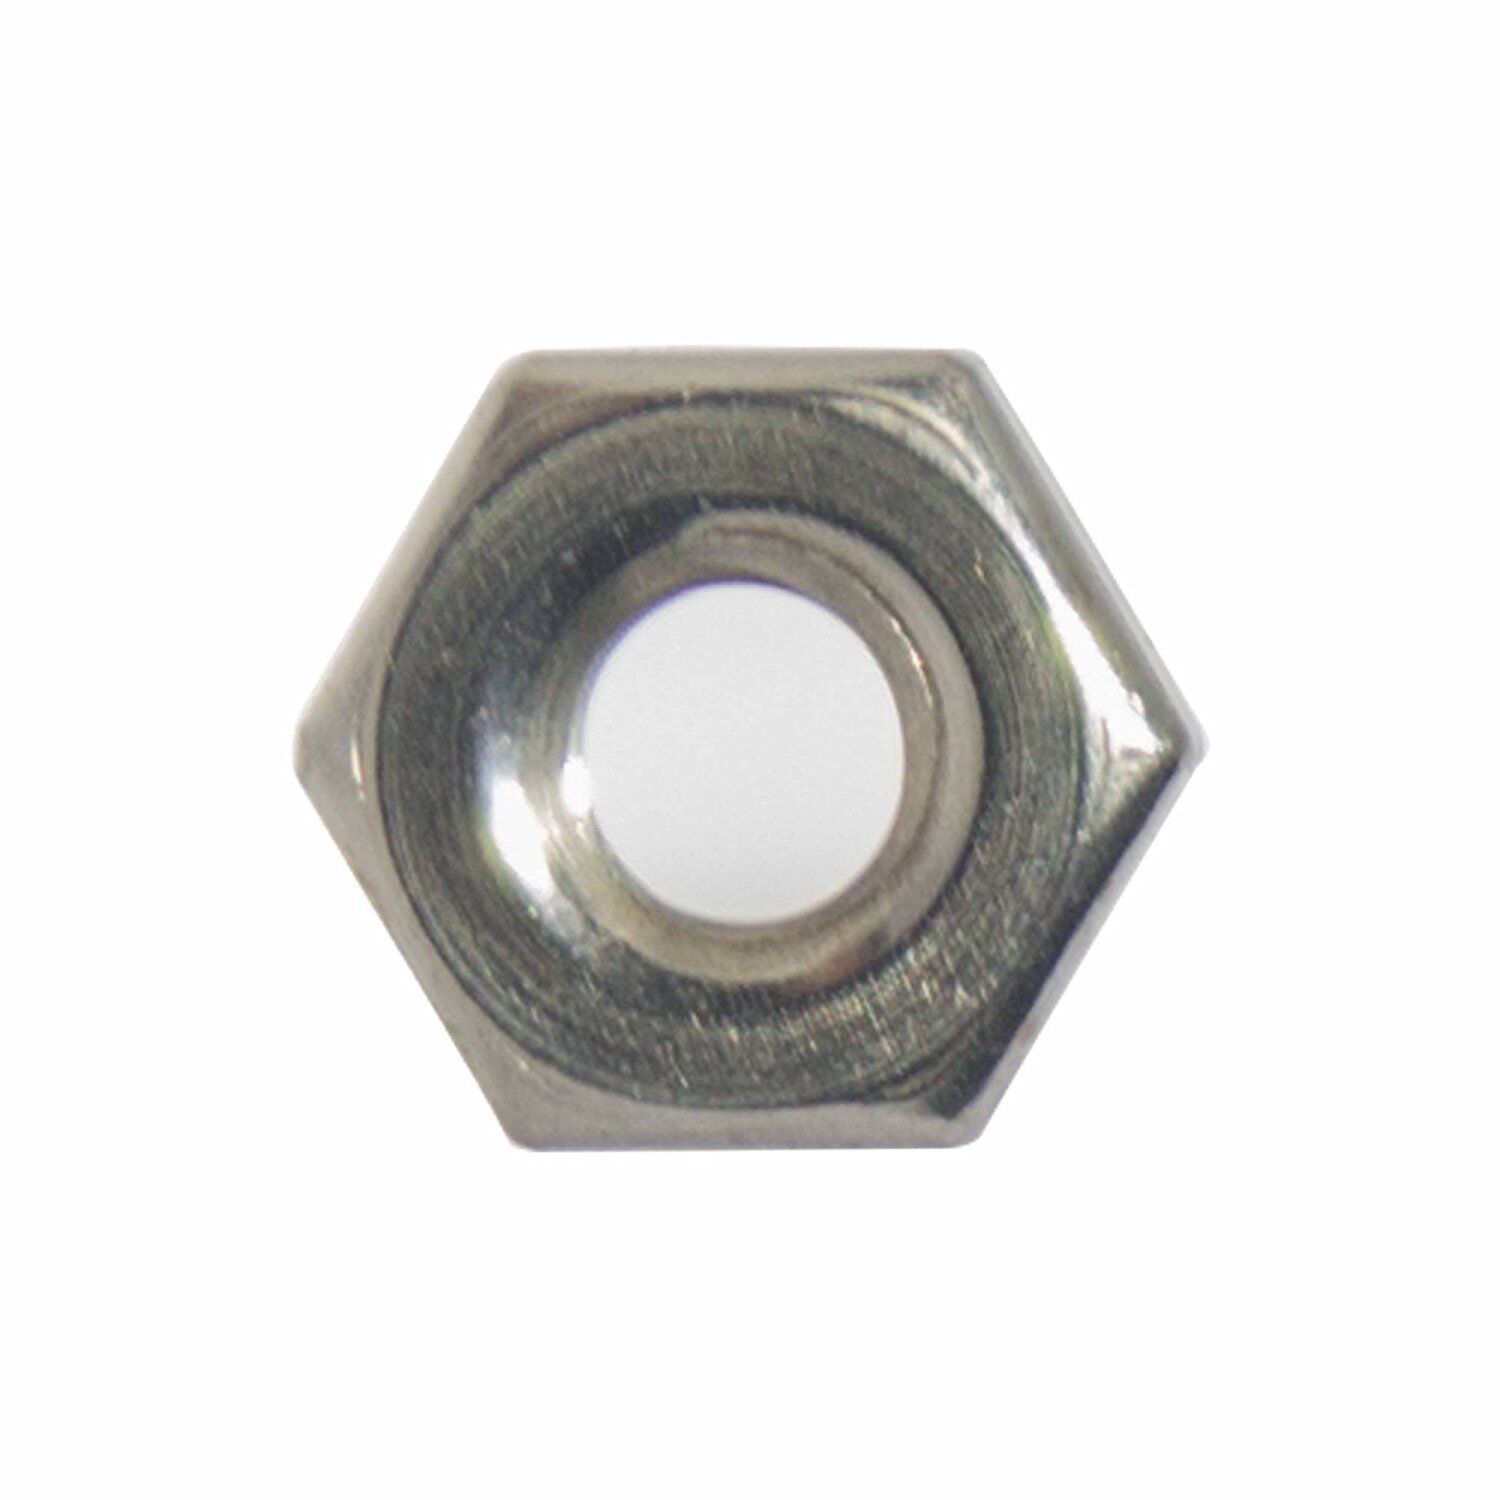 10-24 Machine Screw Hex Nuts Stainless Steel 18-8 Qty 100